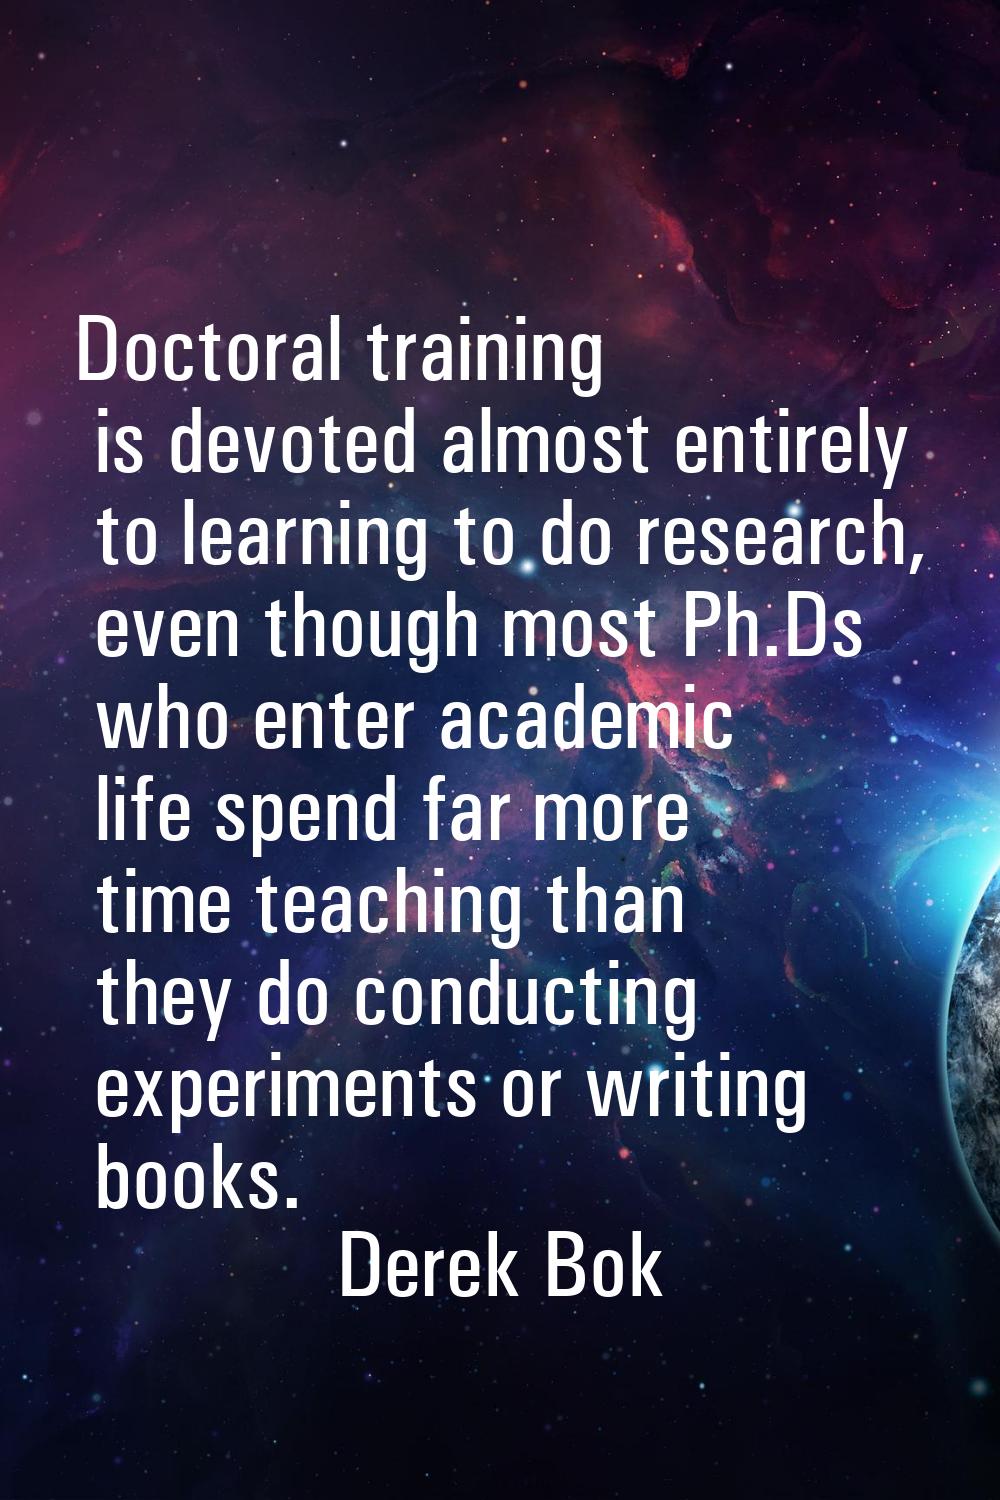 Doctoral training is devoted almost entirely to learning to do research, even though most Ph.Ds who